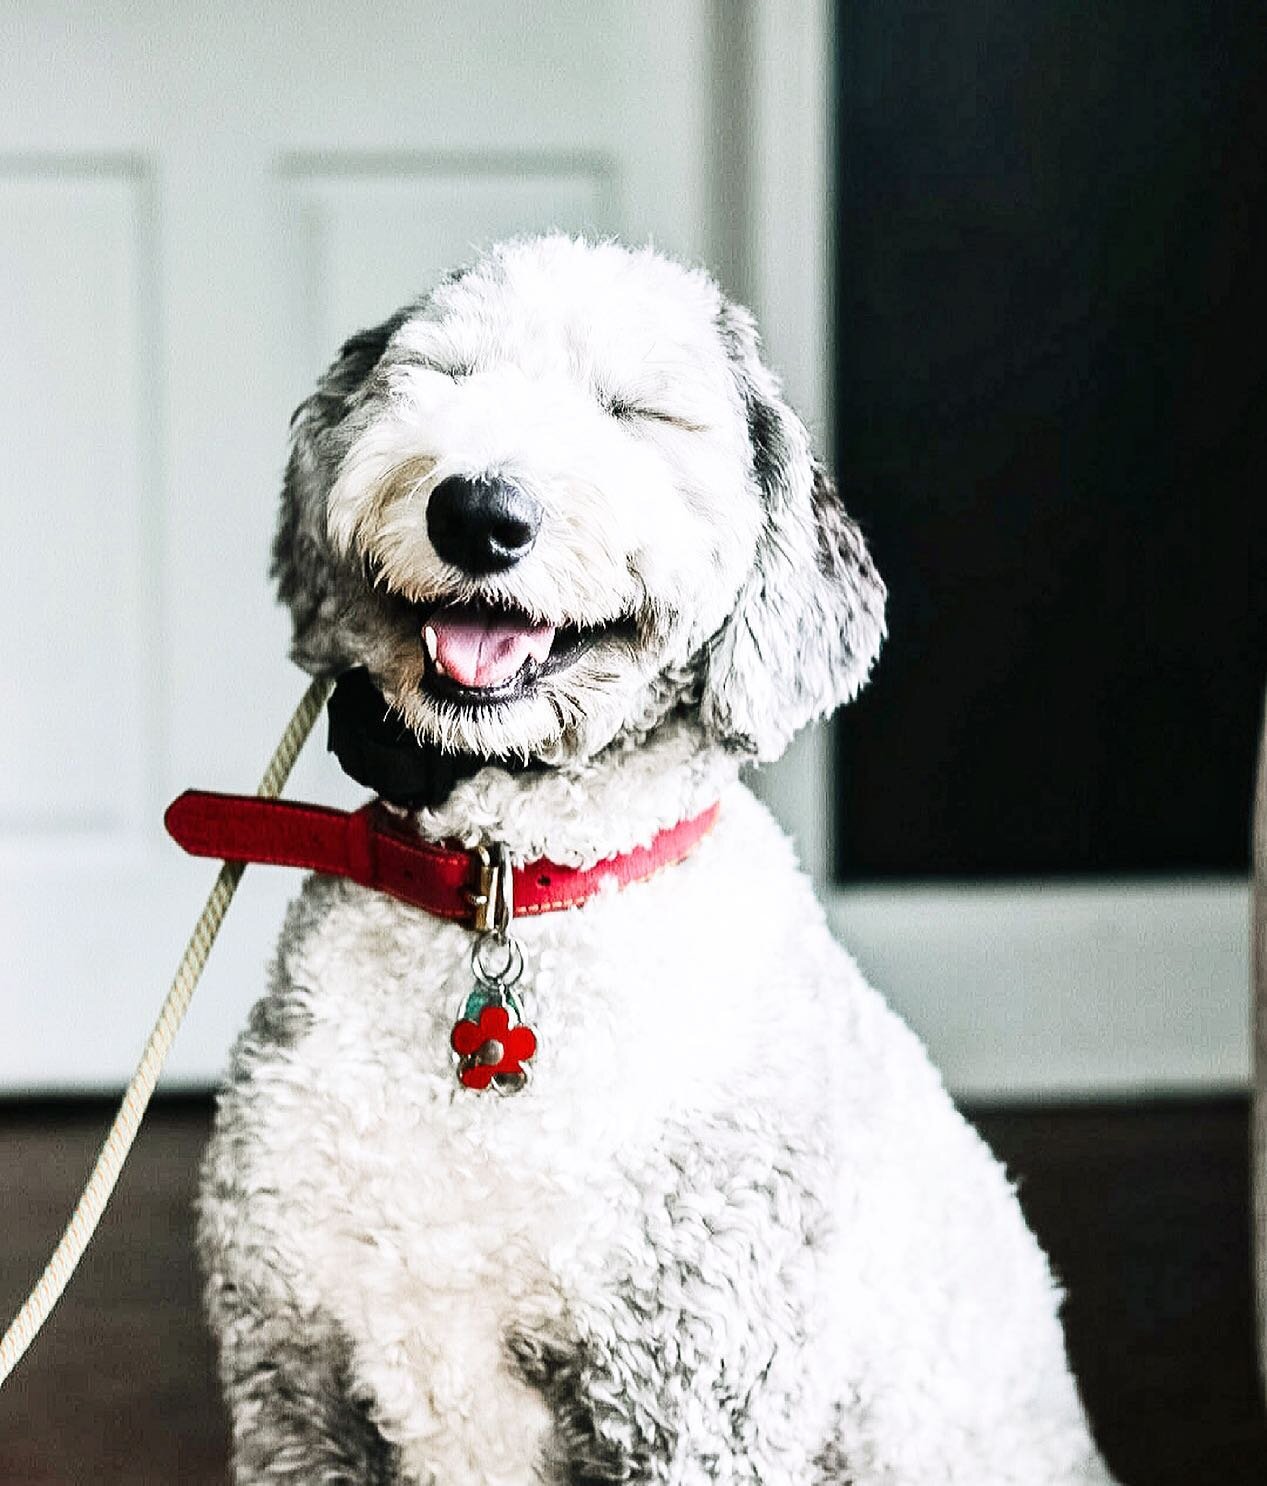 Meet Millie.

She&rsquo;s a sweet Sheepadoodle that needs a little guidance on how to relax. She&rsquo;s a known door bolter, leash puller, and gets very over excited with guests. 

A solid foundation of recall, place command, and structured leash wa